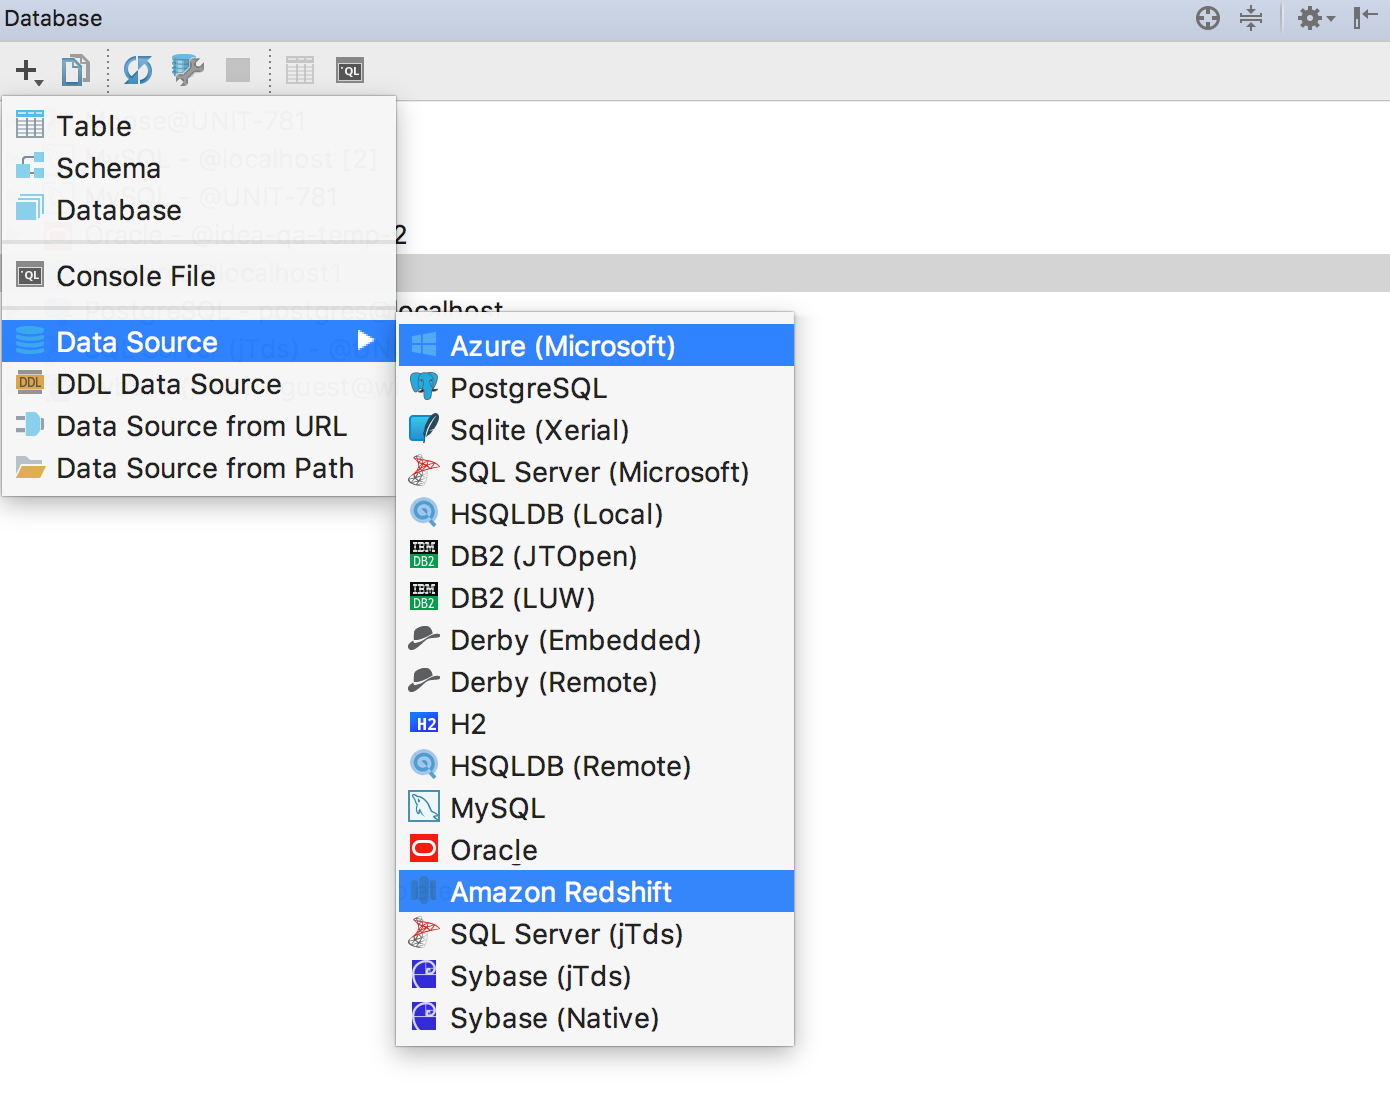 IntelliJ IDEA and Owncloud Yosemite icons by Zorge-R 